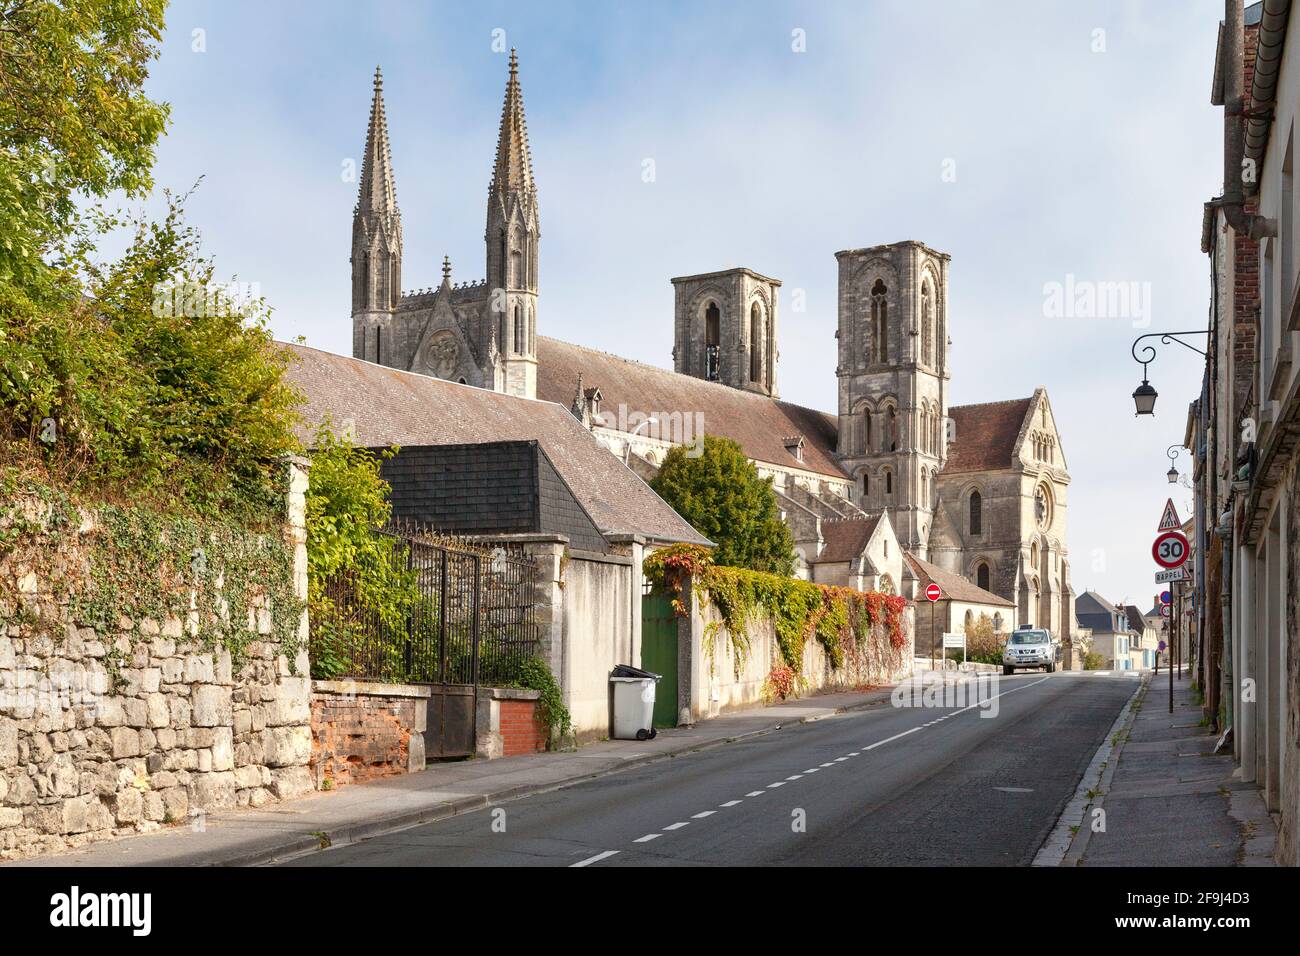 Laon, France - September 8 2020: The Saint-Martin de Laon abbey was founded in 1124 by the bishop of Laon, Barthélemy de Jur, and Norbert de Xanten wh Stock Photo